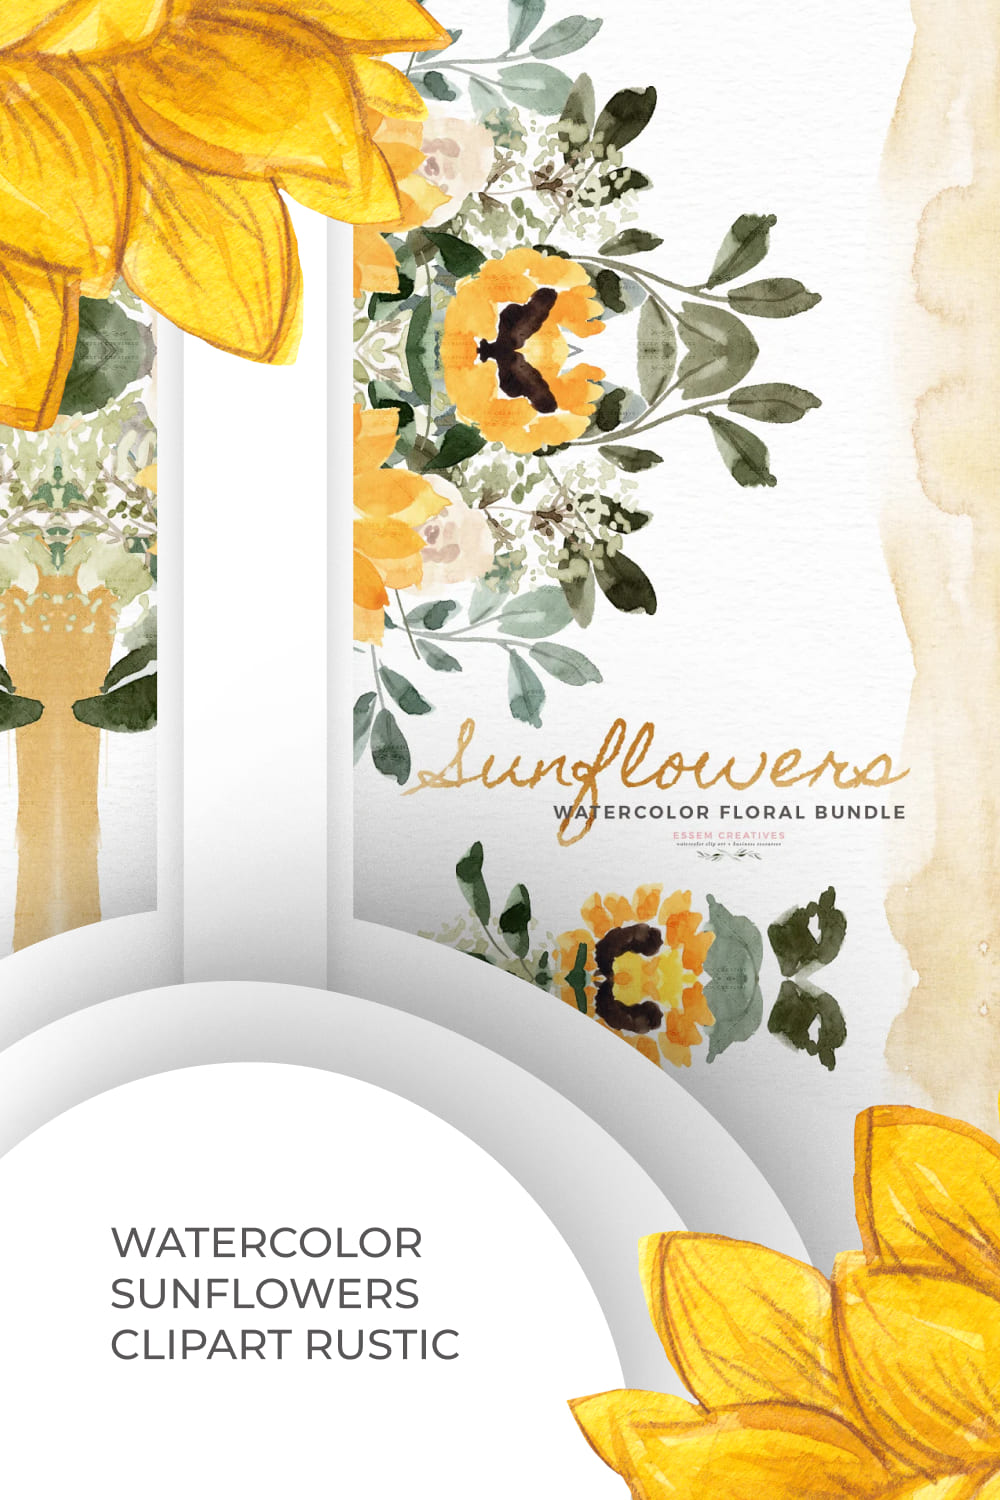 Watercolor Sunflowers Clipart Rustic.